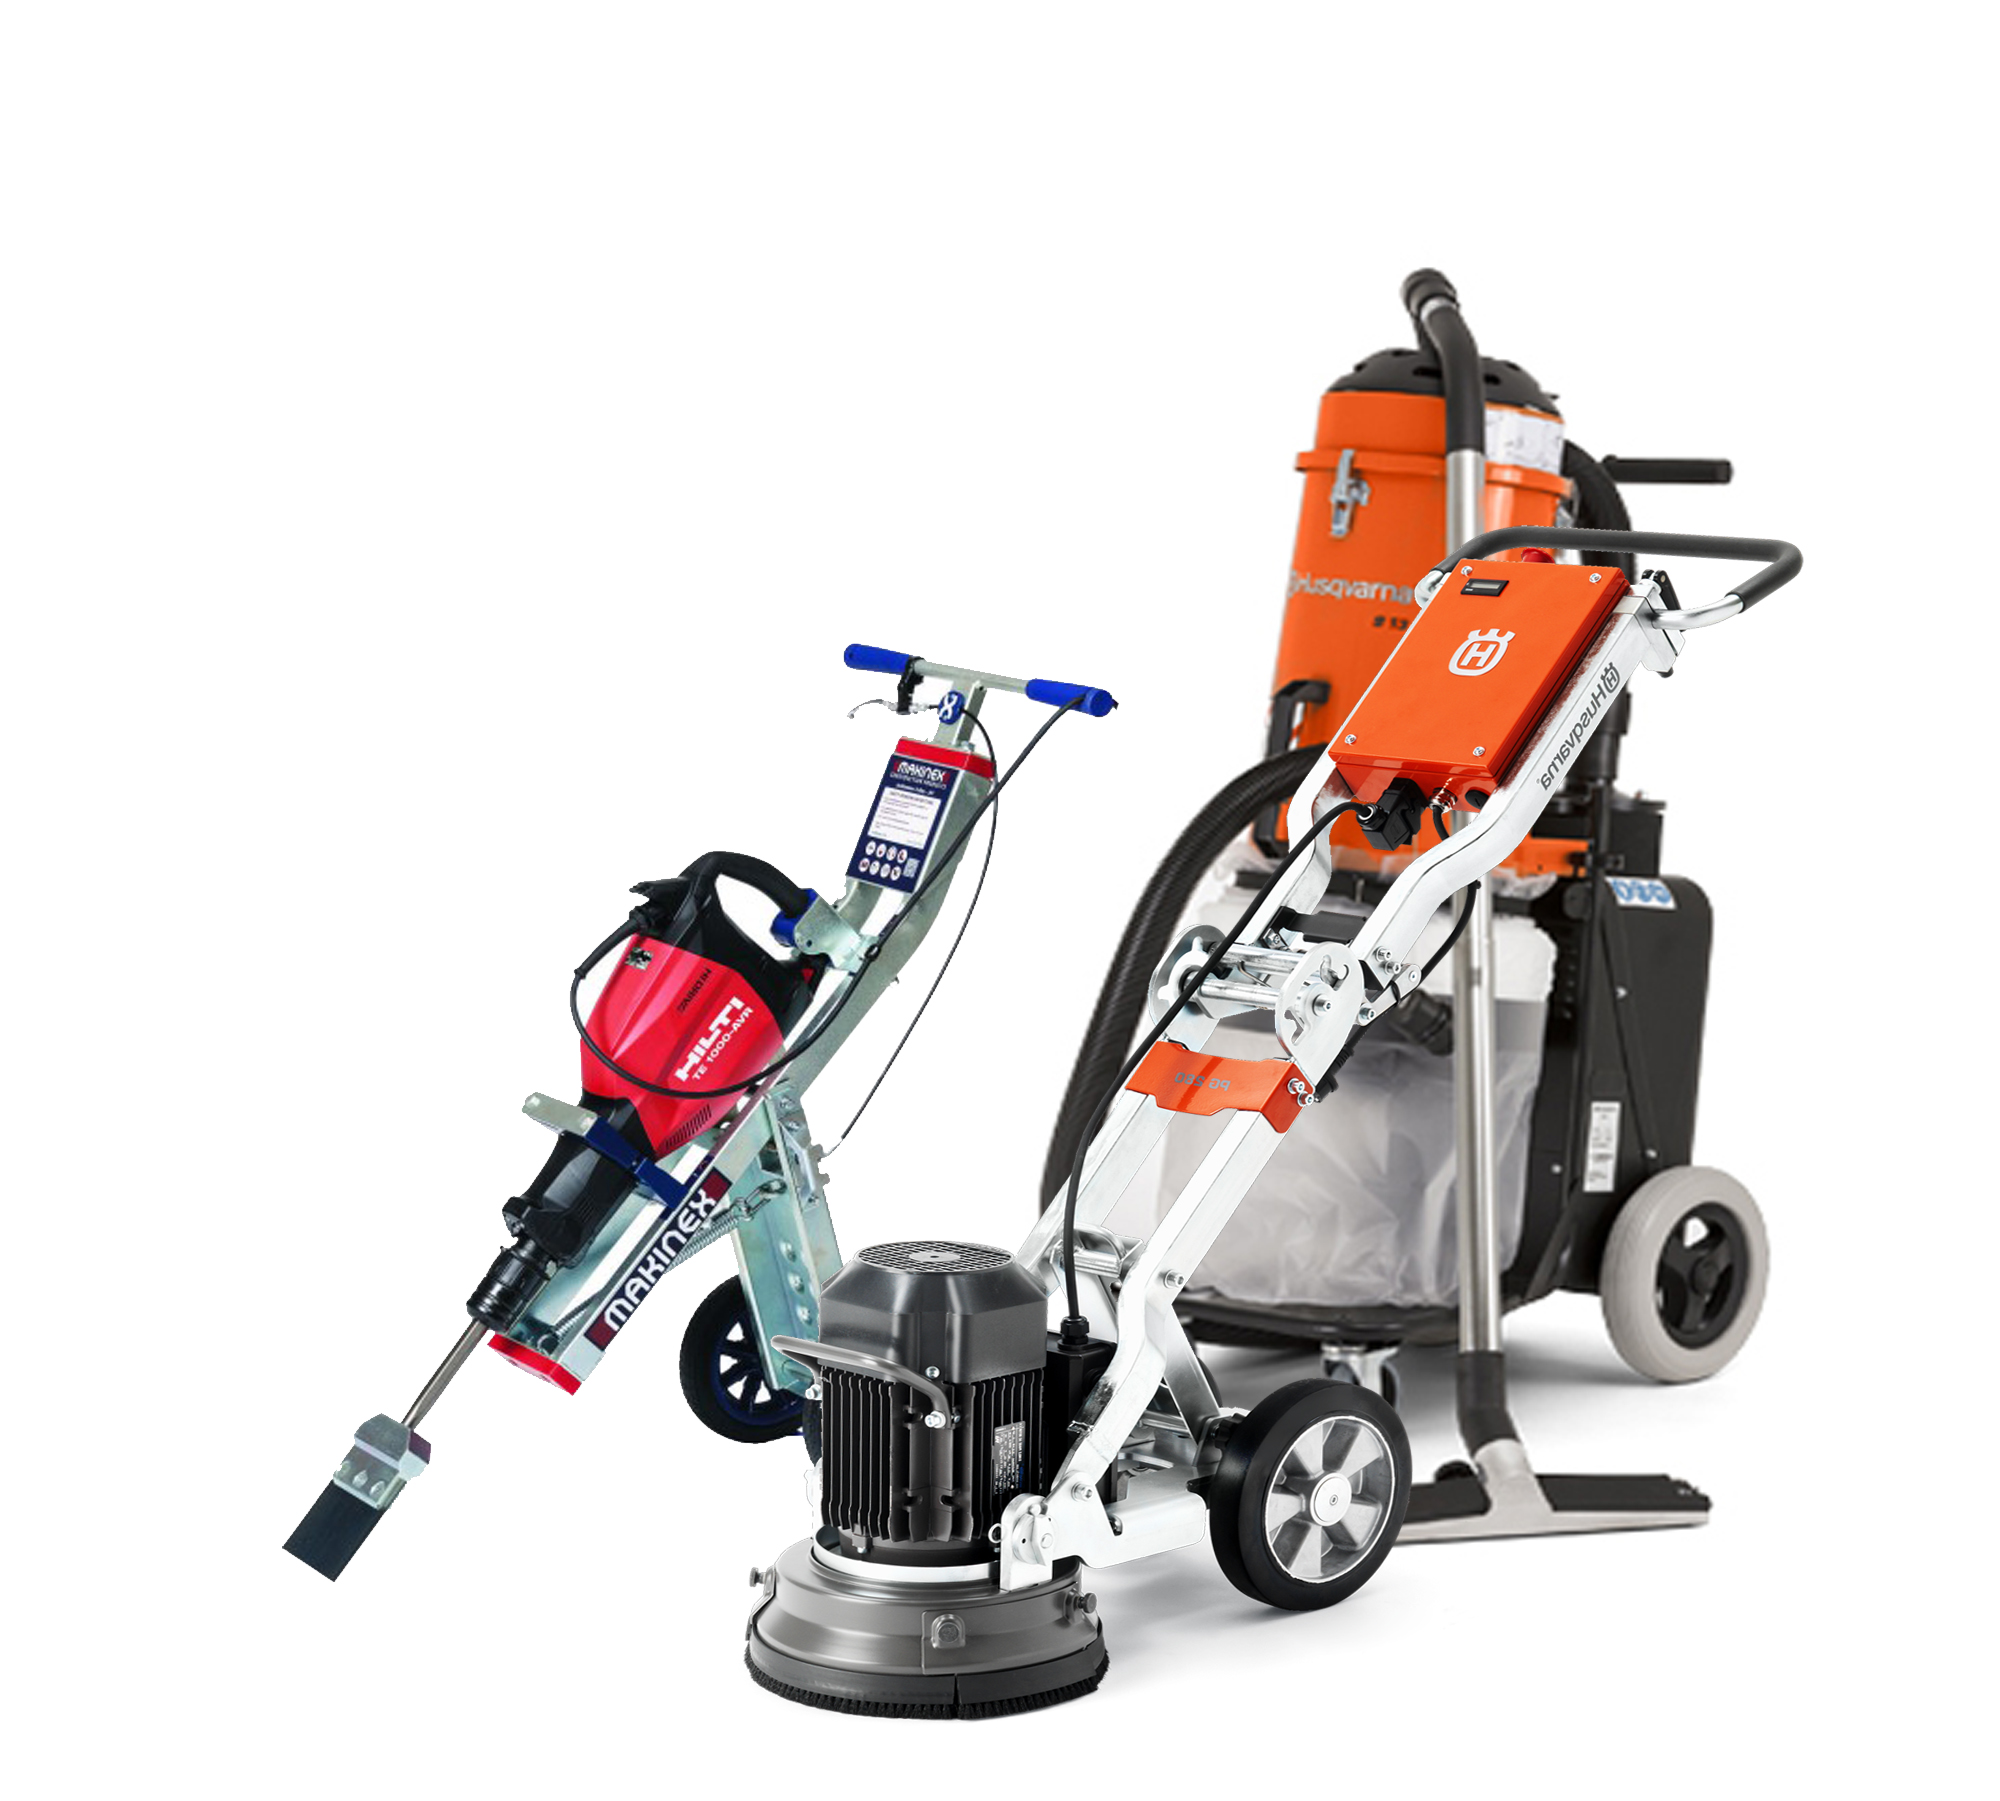 Tile remover and 280mm Floor Grinder Package including vacuum - Hire Pro